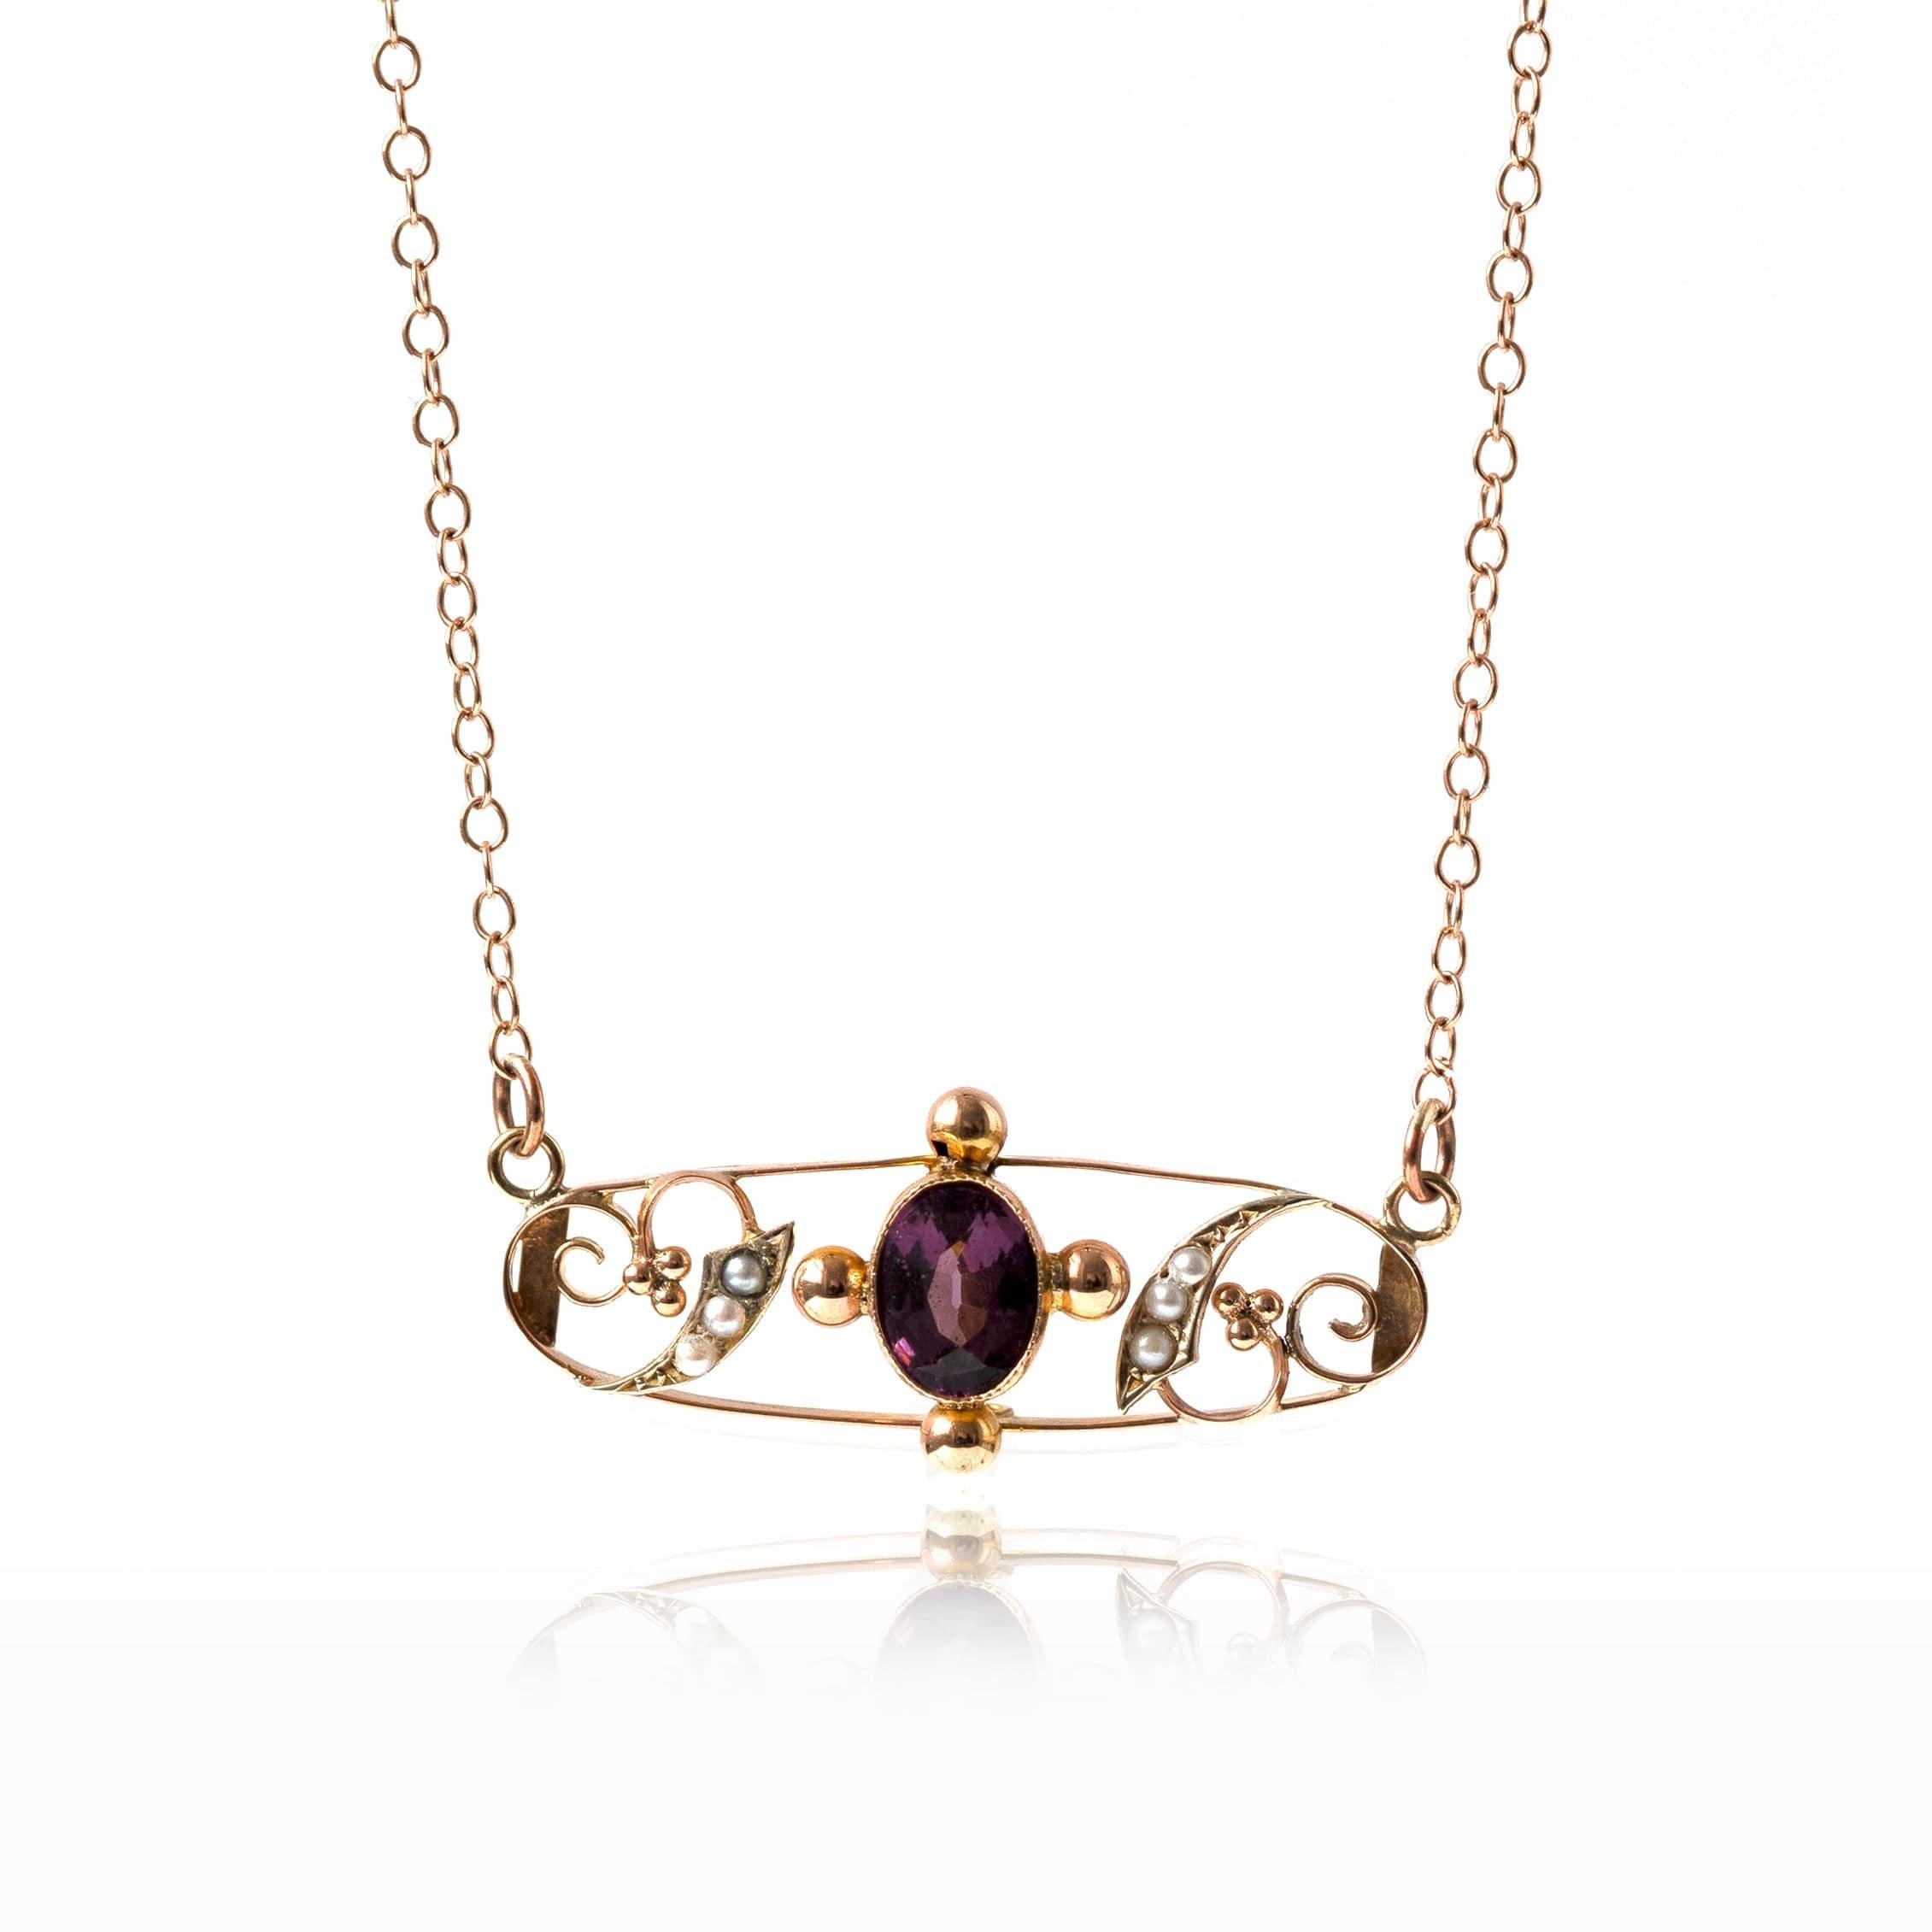 Antique Edwardian 9ct rose gold bar necklace featuring seed pearls and Amethyst. Pearls in the Victorian era were associated with a number of symbols such as innocence, purity, humility and harmony. 

This piece was converted from a brooch into a